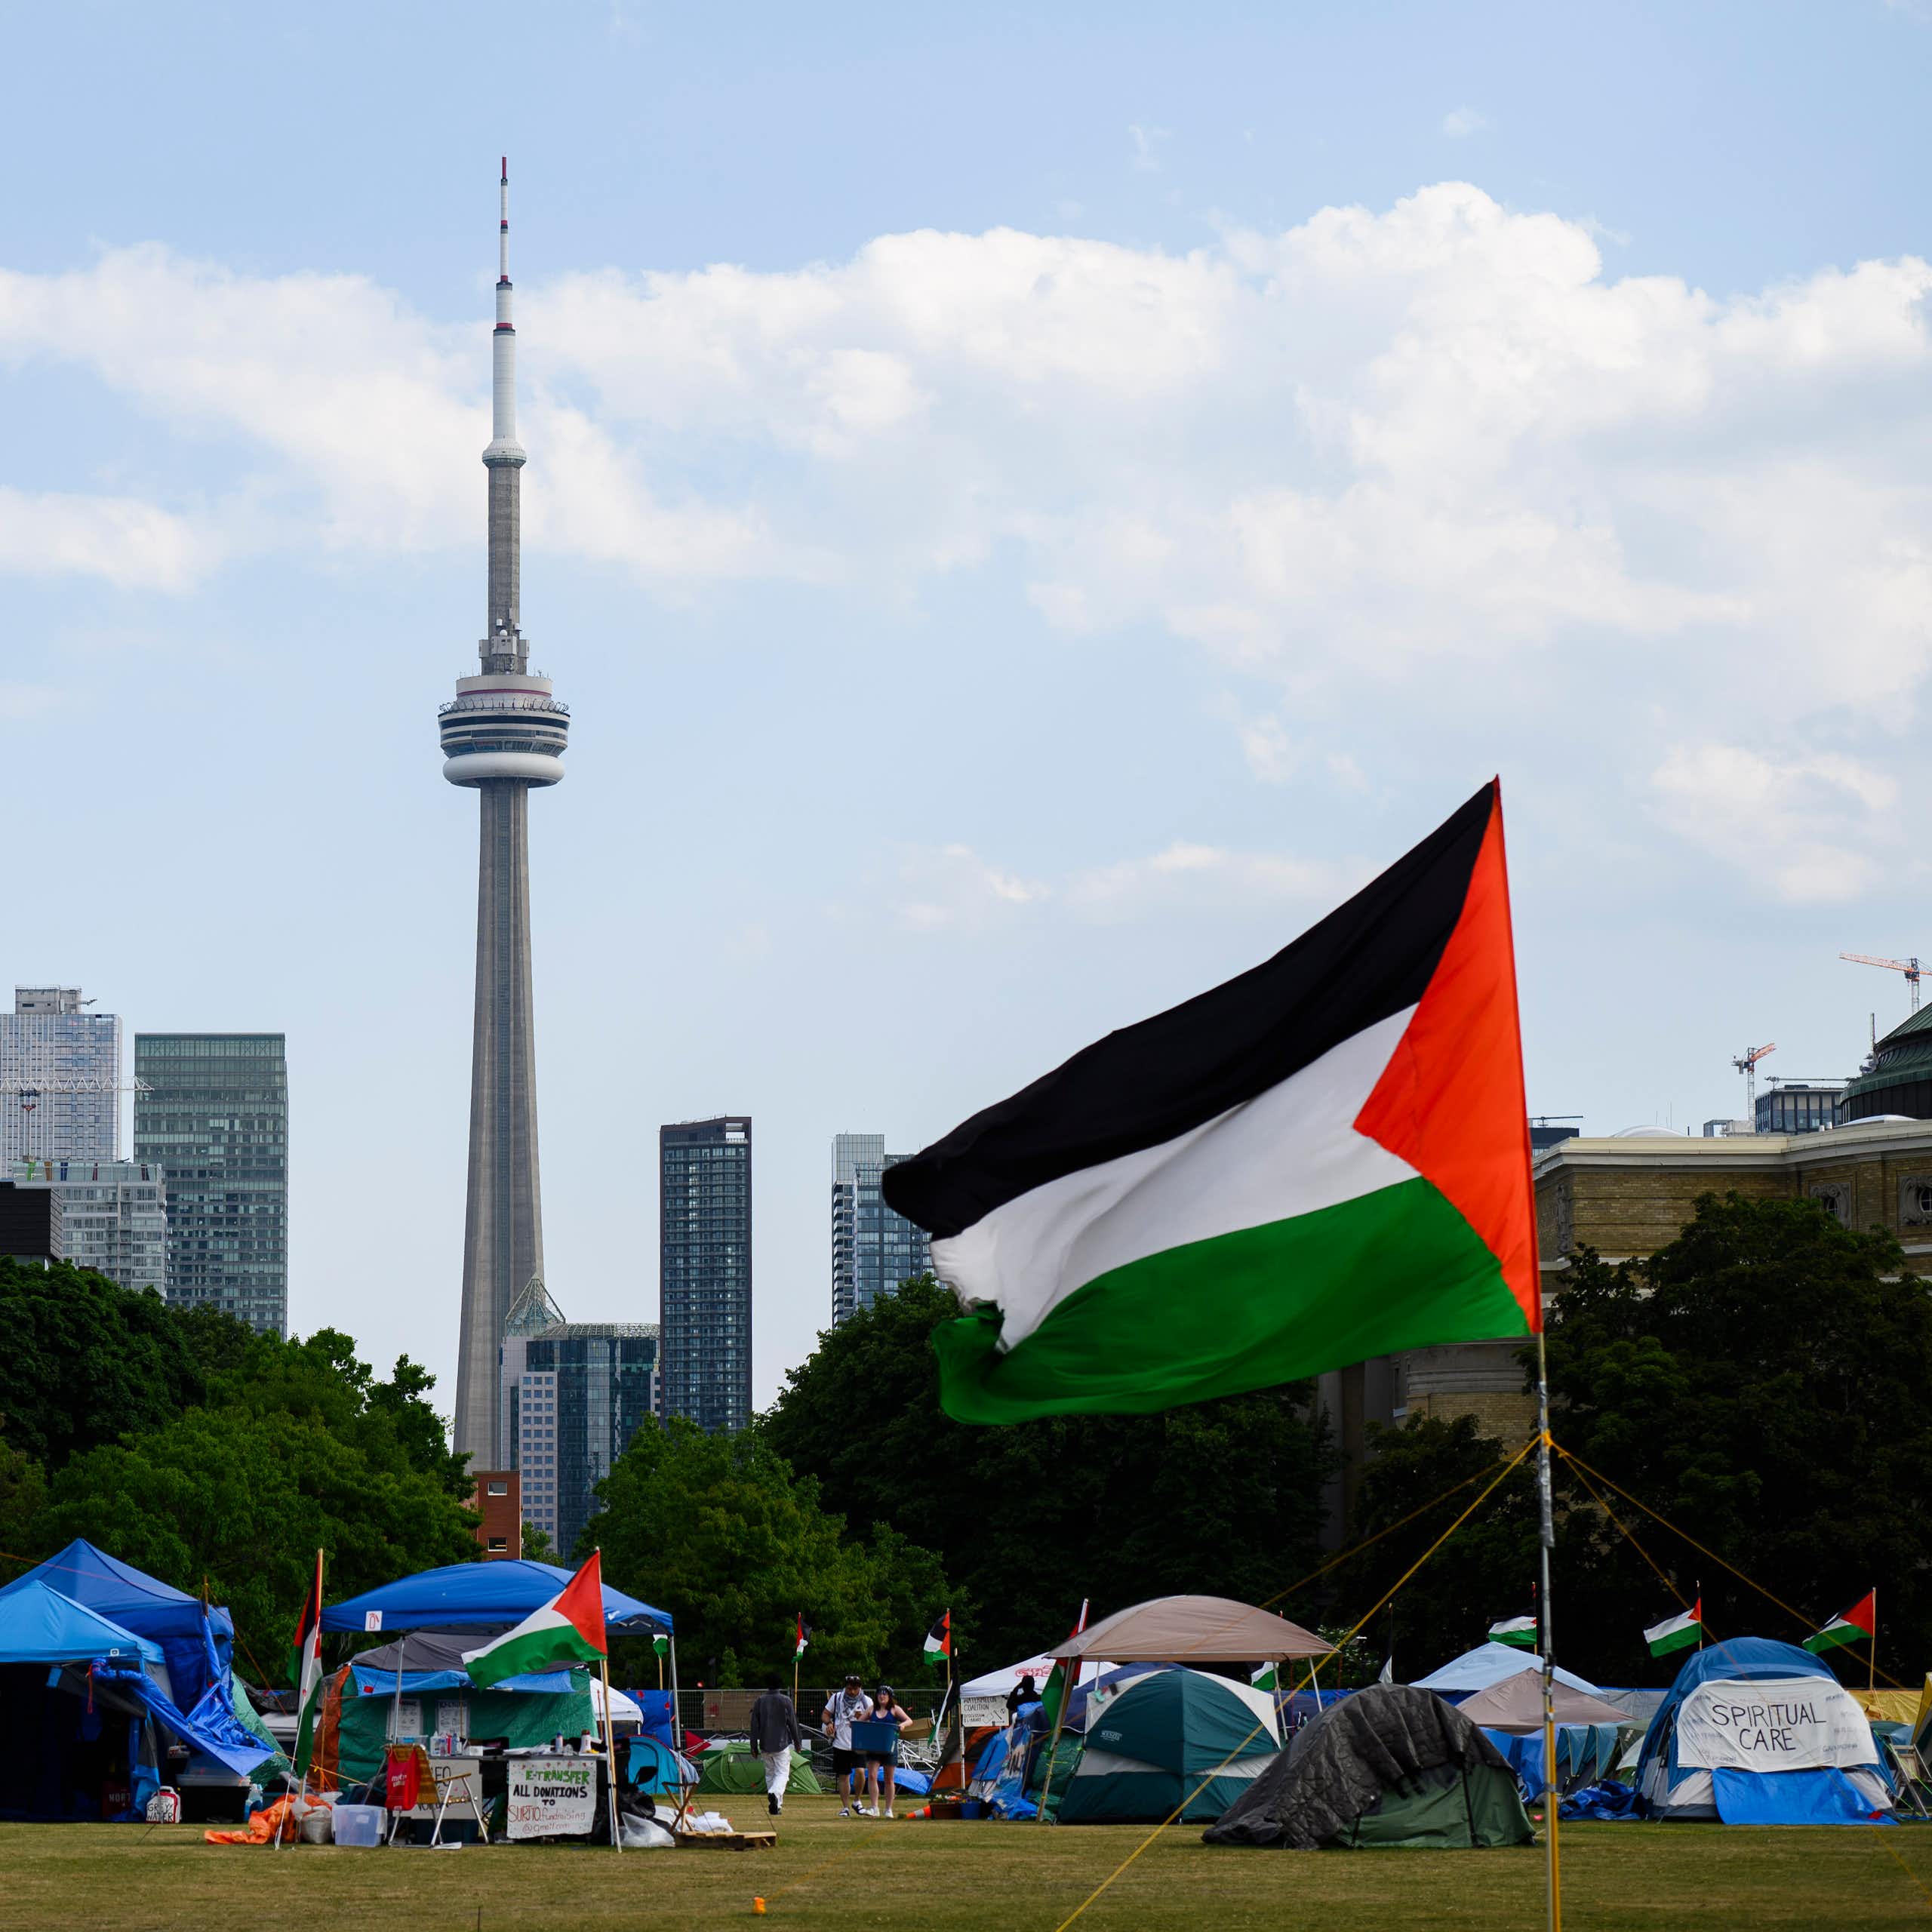 Tents on a lawn with Palestinian flags. The CN Tower and Toronto skyline are seen in the background